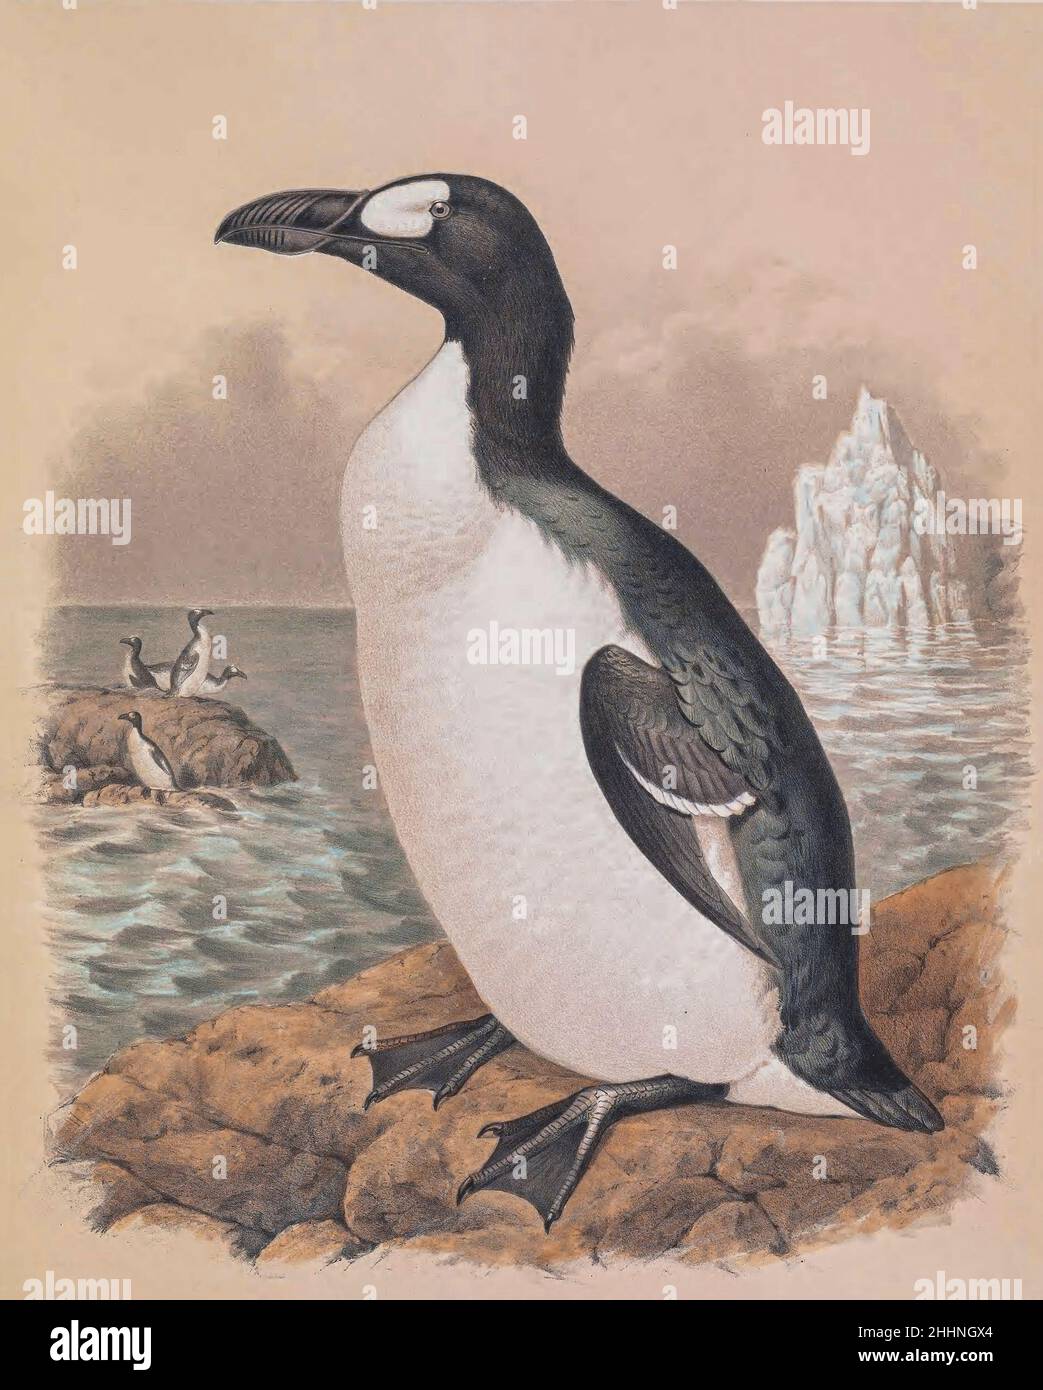 The great auk (Pinguinus impennis) is a species of flightless alcid that became extinct in the mid-19th century. It was the only modern species in the genus Pinguinus. It is not closely related to the birds now known as penguins, which were discovered later by Europeans and so named by sailors because of their physical resemblance to the great auk. tinted lithograph Illustrated by Joseph Smit, from the book ' The beautiful and curious birds of the world ' by Charles Barney Cory, Published by the Author for the subscribers Boston USA 1883. Plates are tinted lithographs, some with additional han Stock Photo